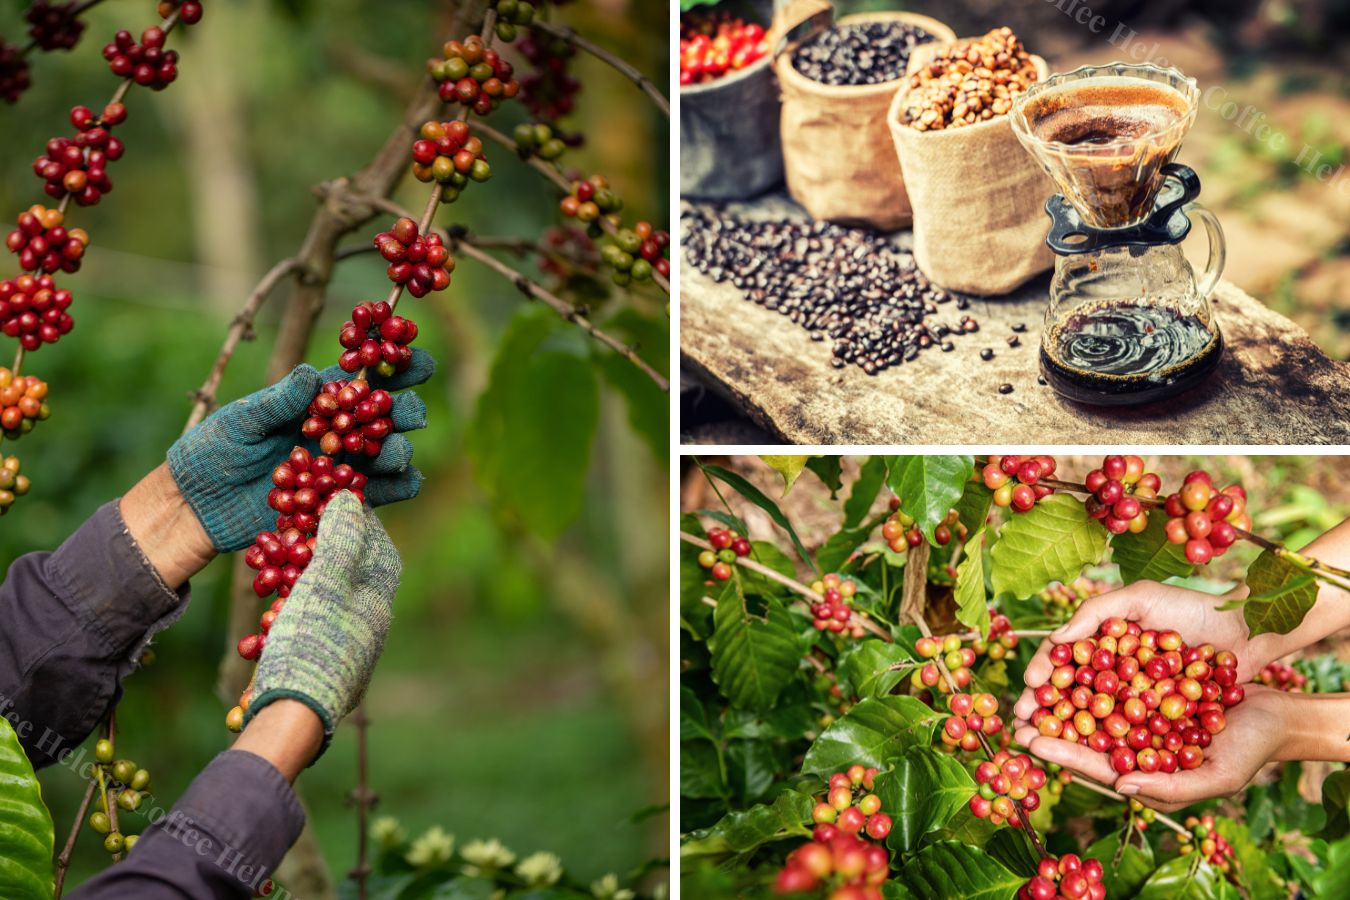 Coffee From Vietnam: The Story Of Robusta In Vietnam